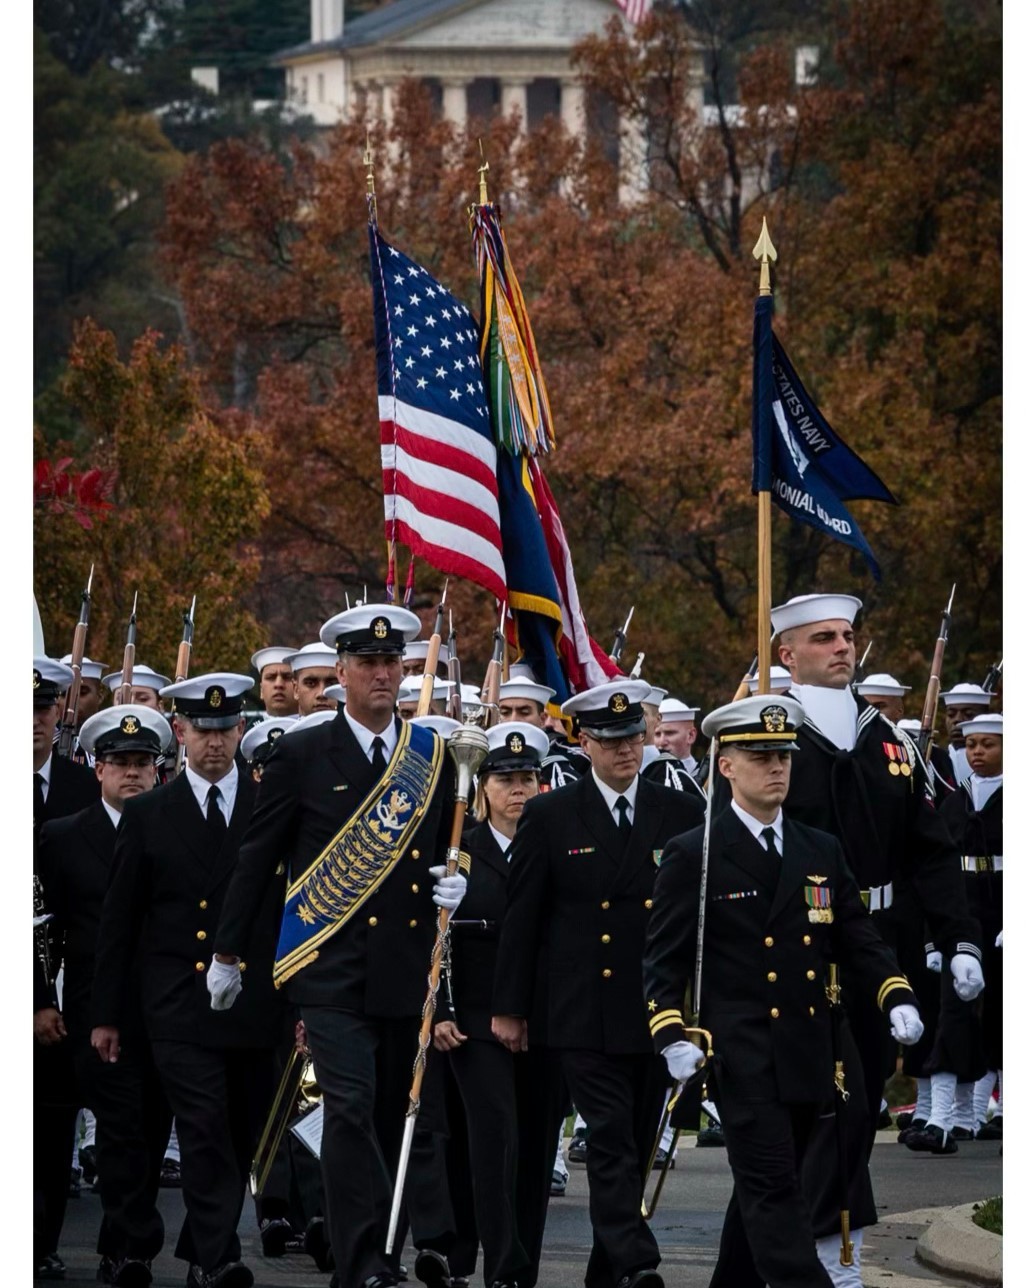 The United States Navy Ceremonial Band passes in front of the Arlington House during a full honors service at Arlington National Cemetery captured by @arlingtonmedia